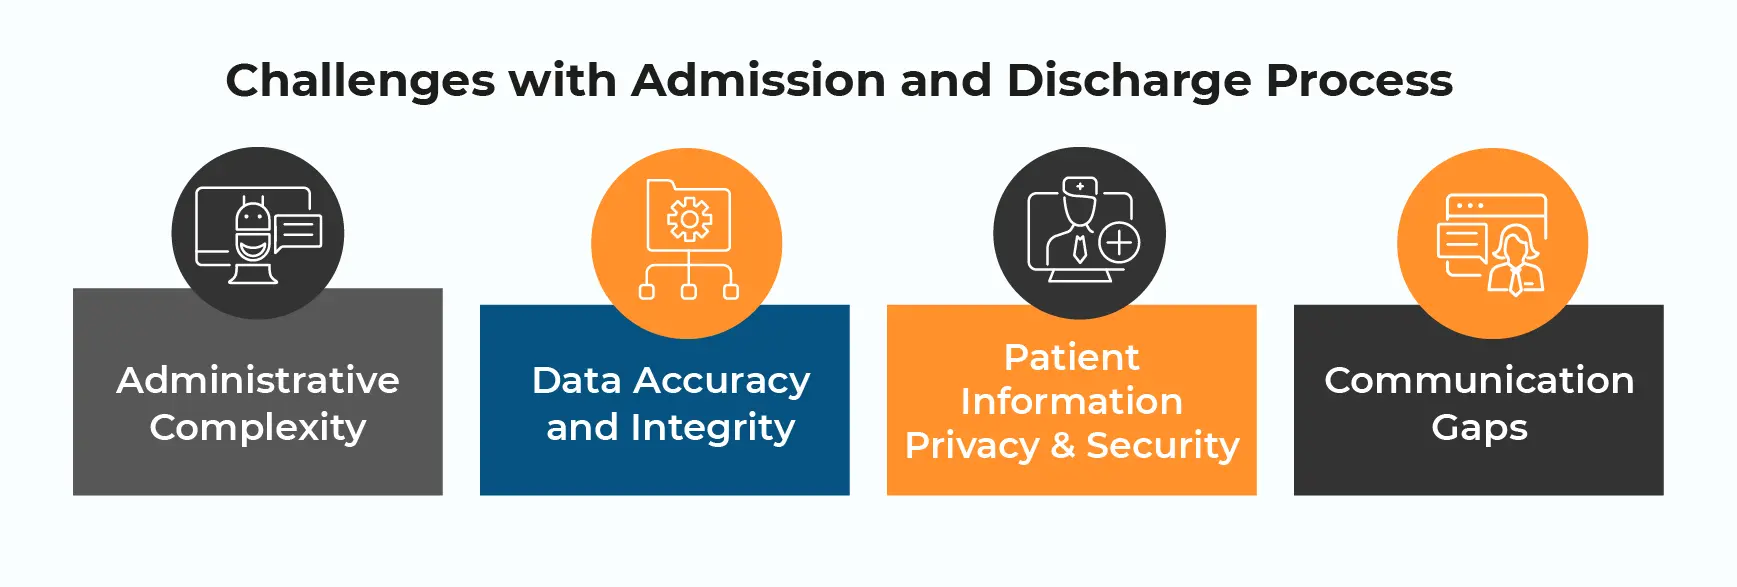 Challenges with Admission and Discharge Process